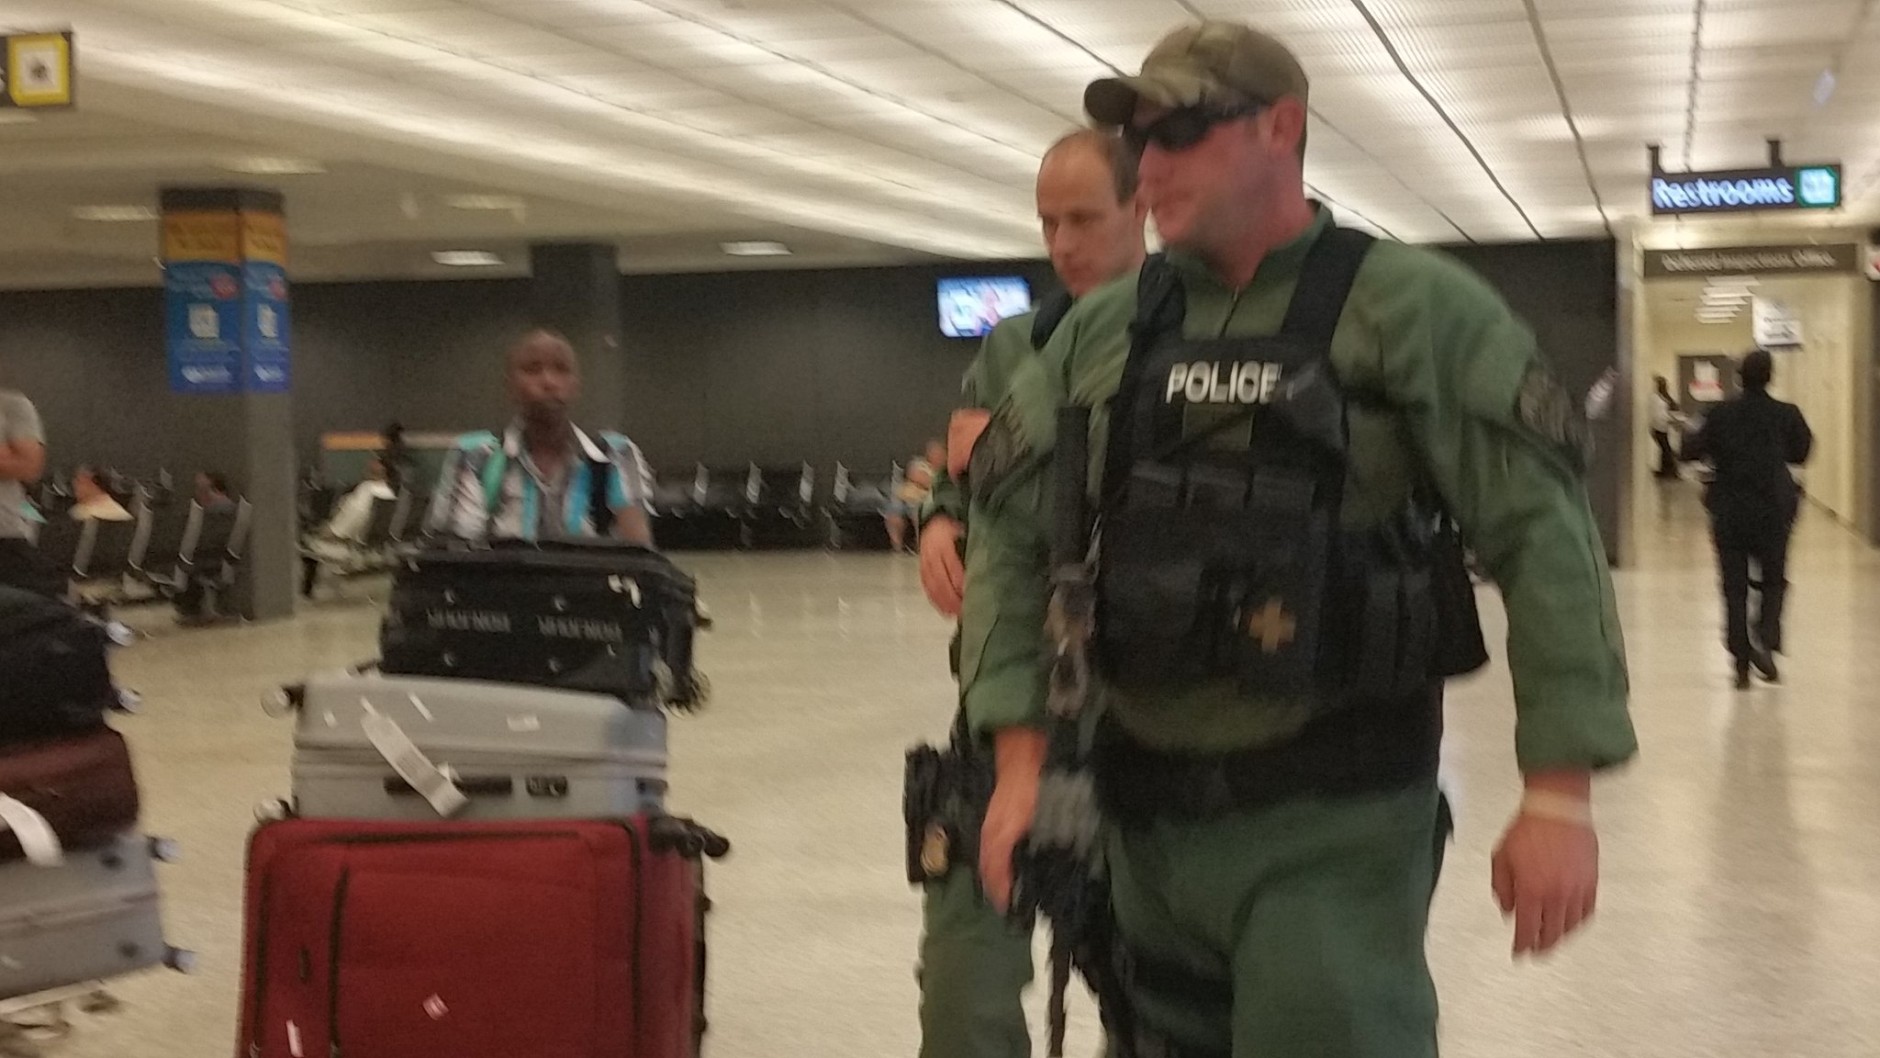 Increased security at Dulles International Airport on Wednesday, June 29, 2016, a day after terror attacks killed dozens at the airport in Istanbul. (WTOP/Kathy Stewart)